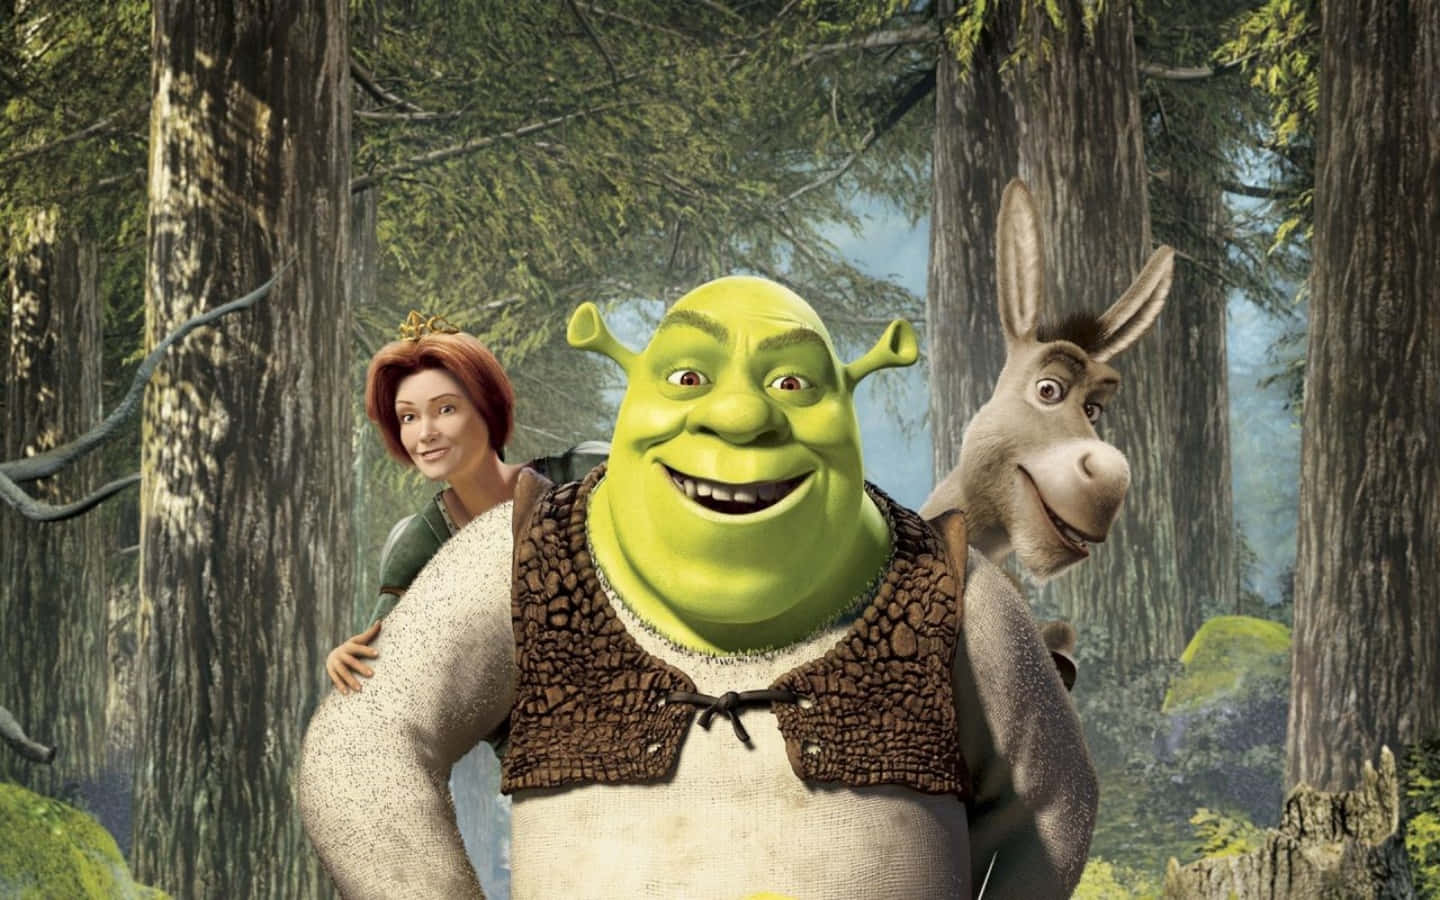 A cartoon character is standing in the woods - Shrek